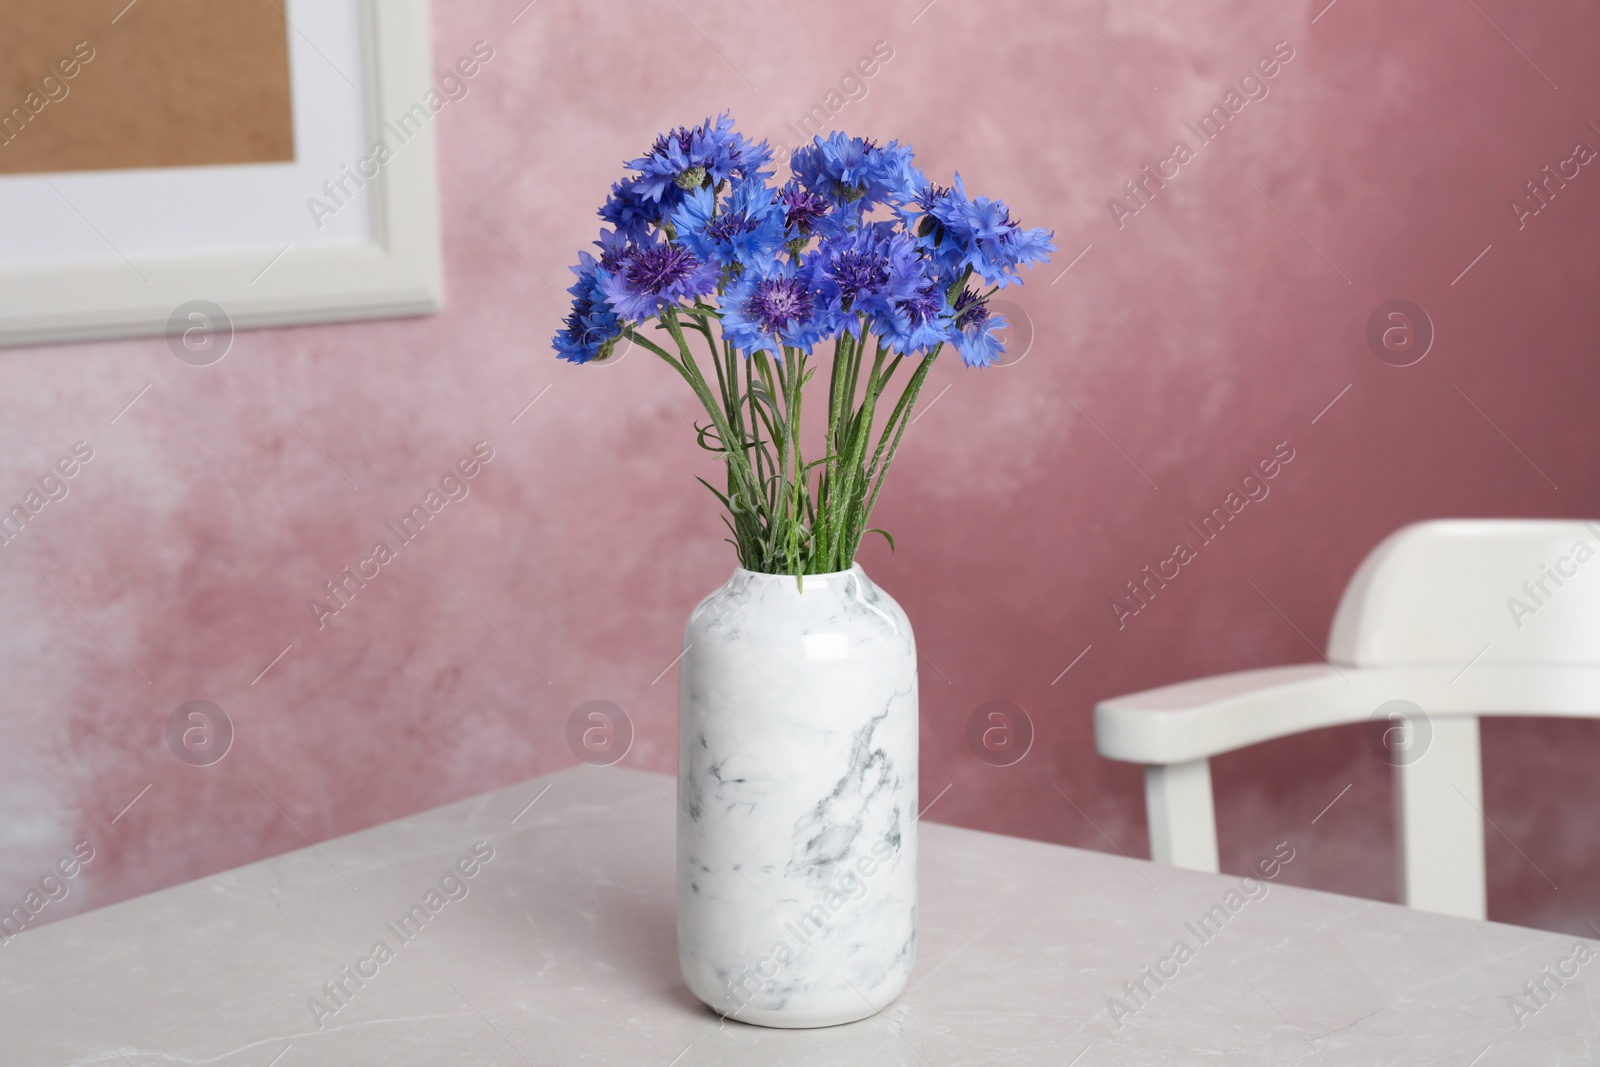 Photo of Bouquet of beautiful cornflowers in vase on light table at home.